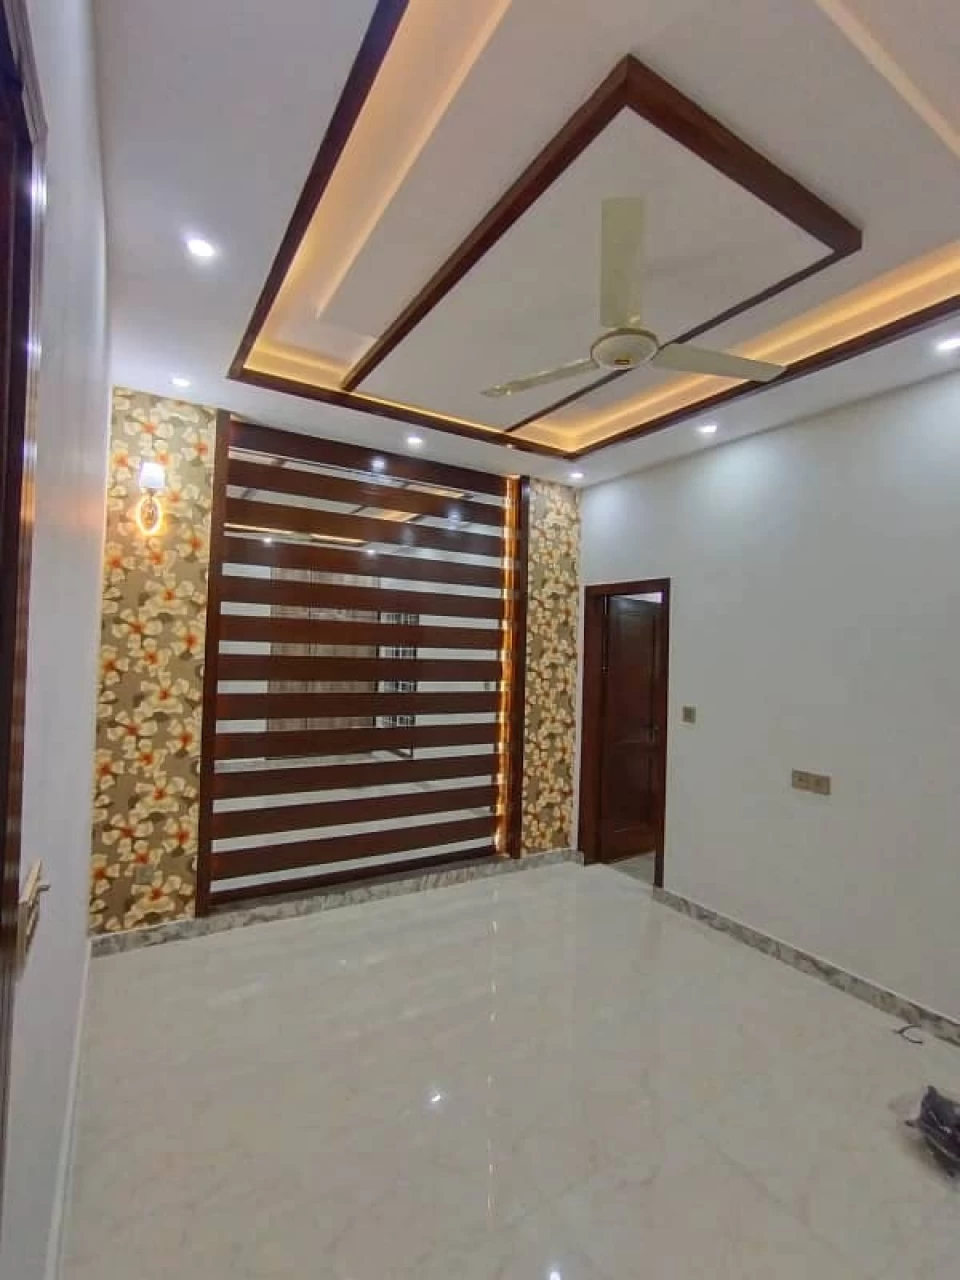 House For Sale in Lahore , House For Sale in Bahria Town , House For Sale in Bahria Town Lahore , House For Sale in Bahria Town - Sector E Bahria Town , 5 Marla house for Sale In Jinnah Block , Bahria Town - Sector E, Bahria Town, Lahore Pakistan,3 Bedrooms Bedrooms, 3 Rooms Rooms, 4 BathroomsBathrooms, House,For Sale,2690